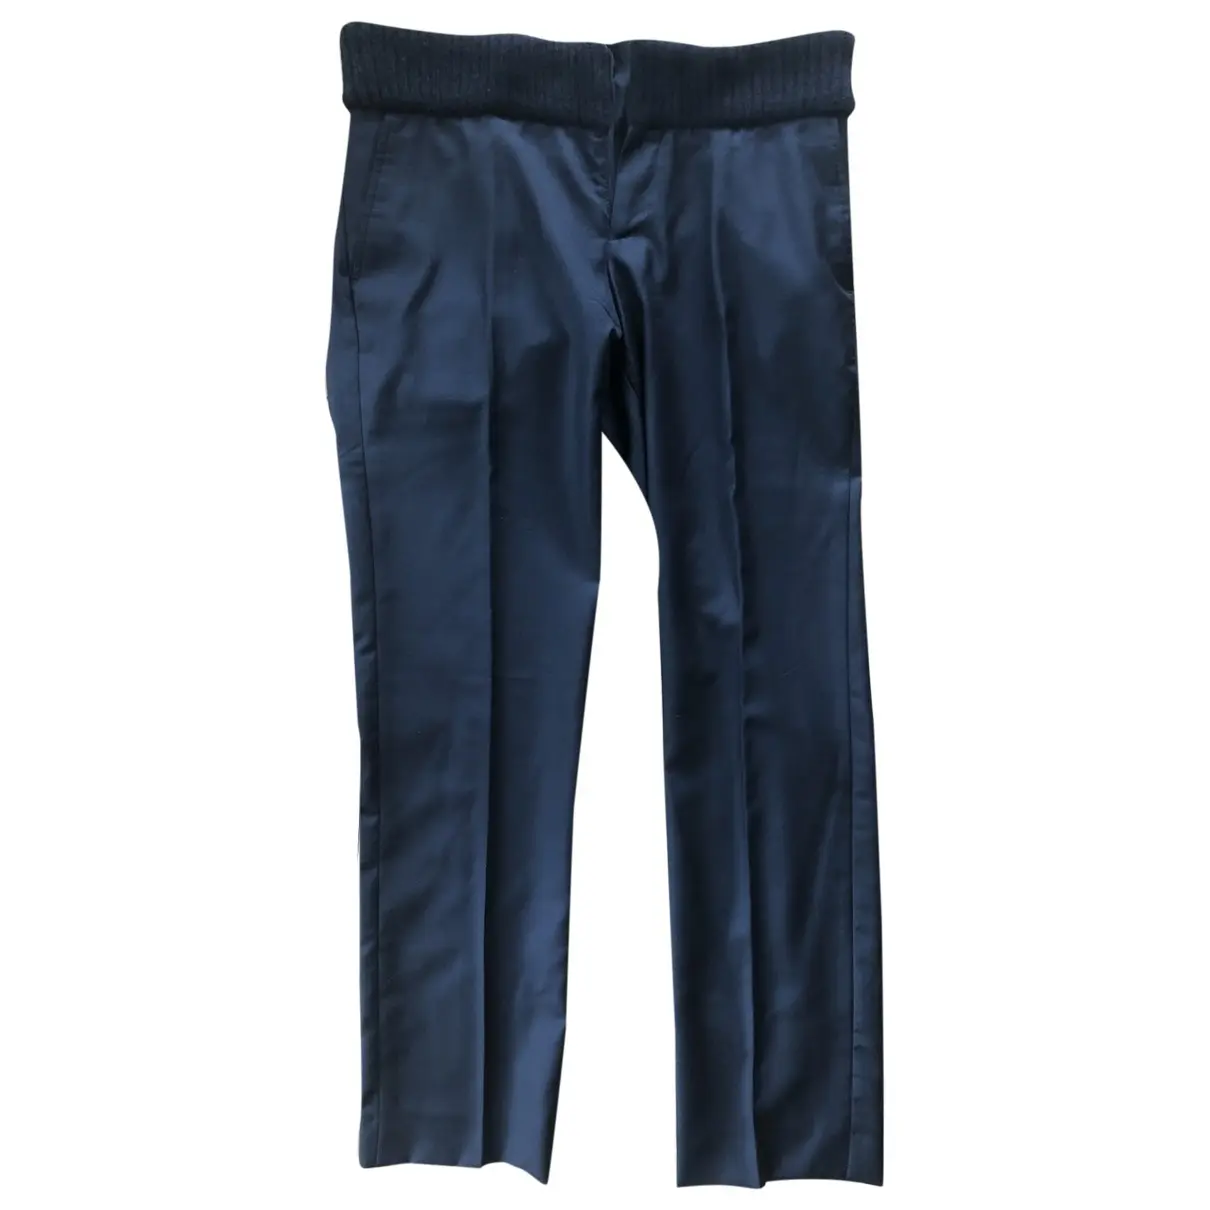 Wool trousers Les Hommes